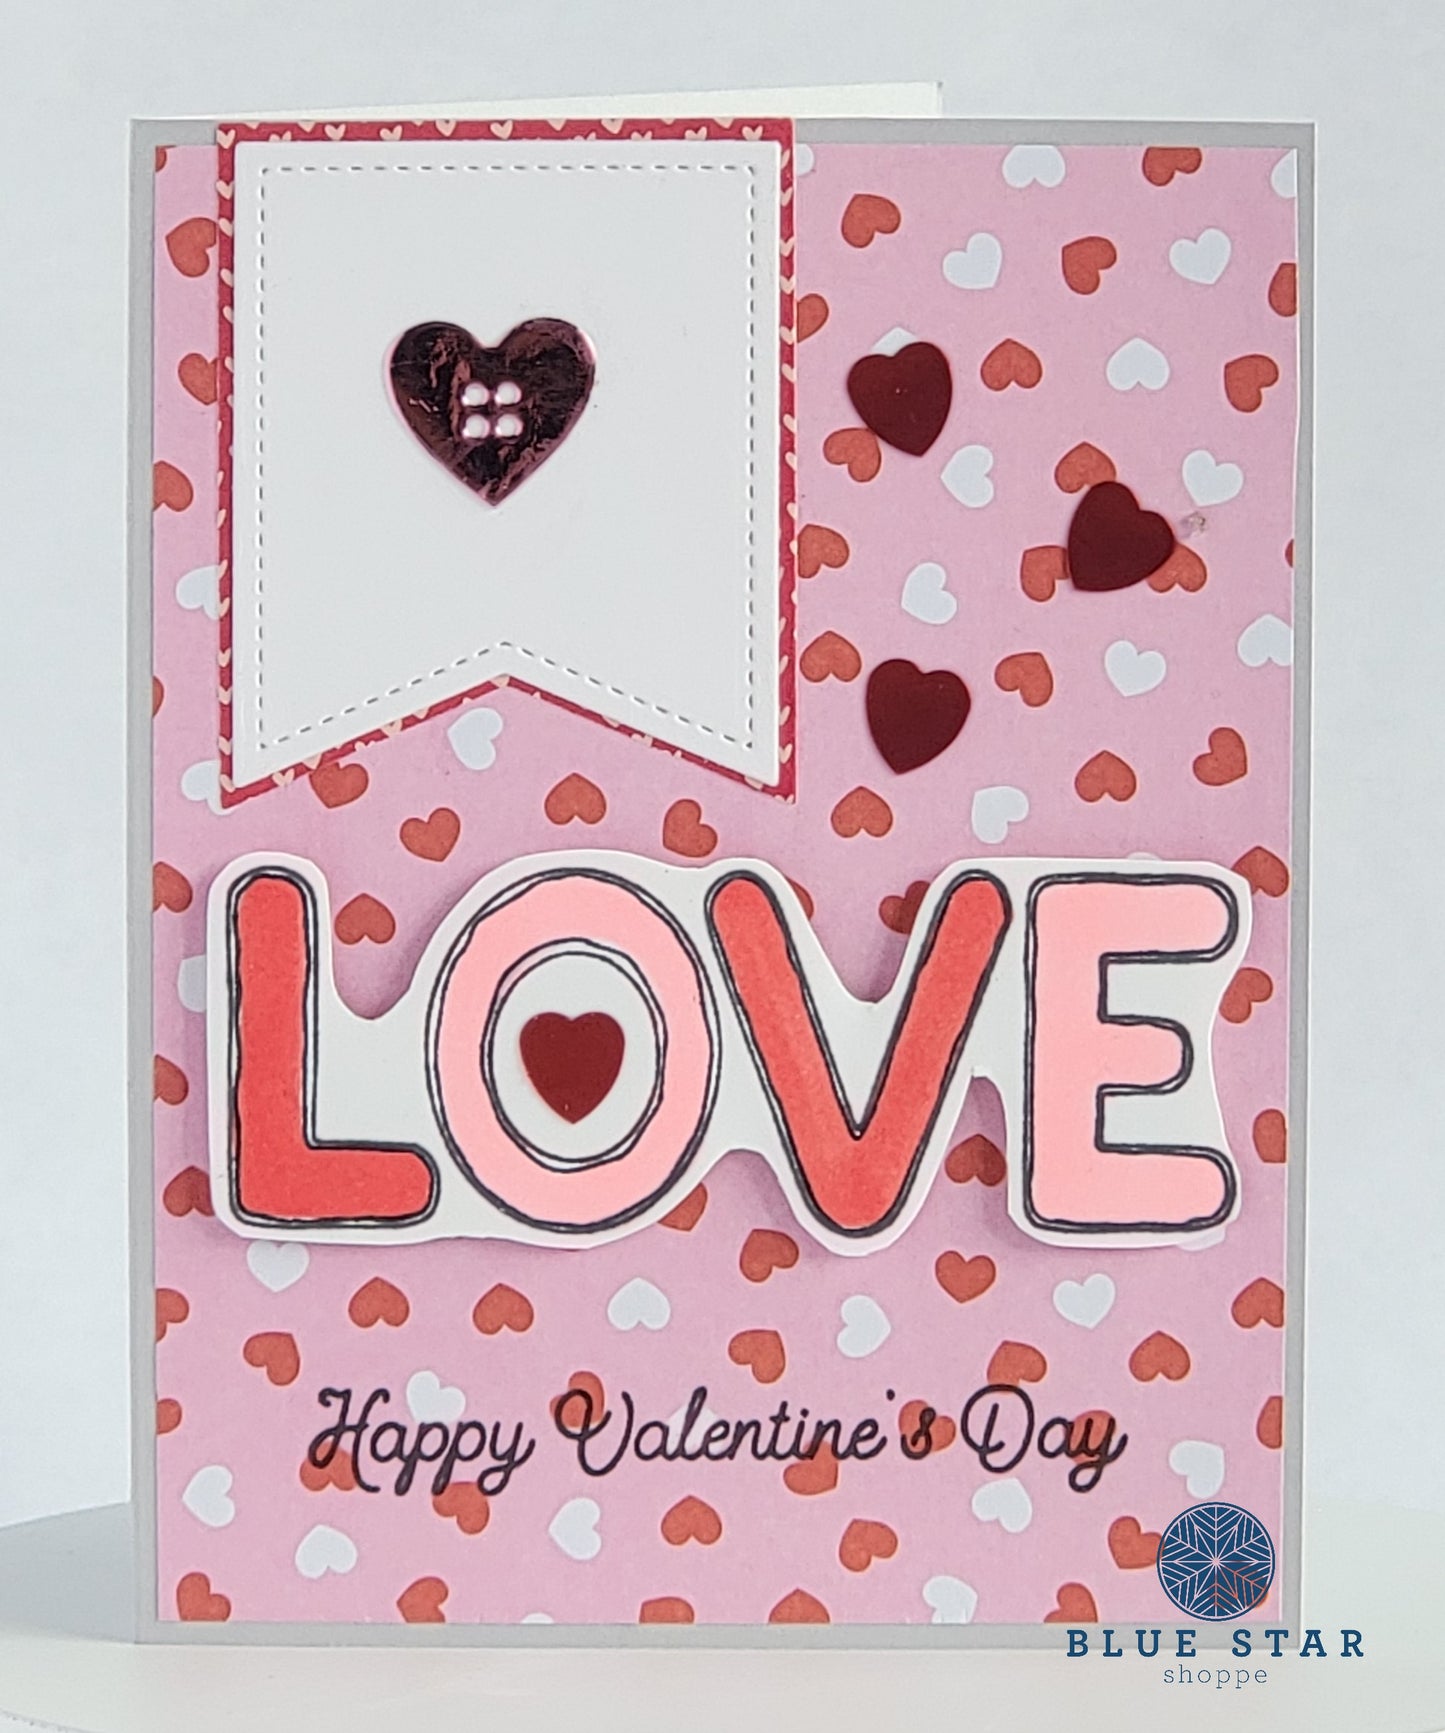 Happy Valentine's Day Heart button Greeting Card